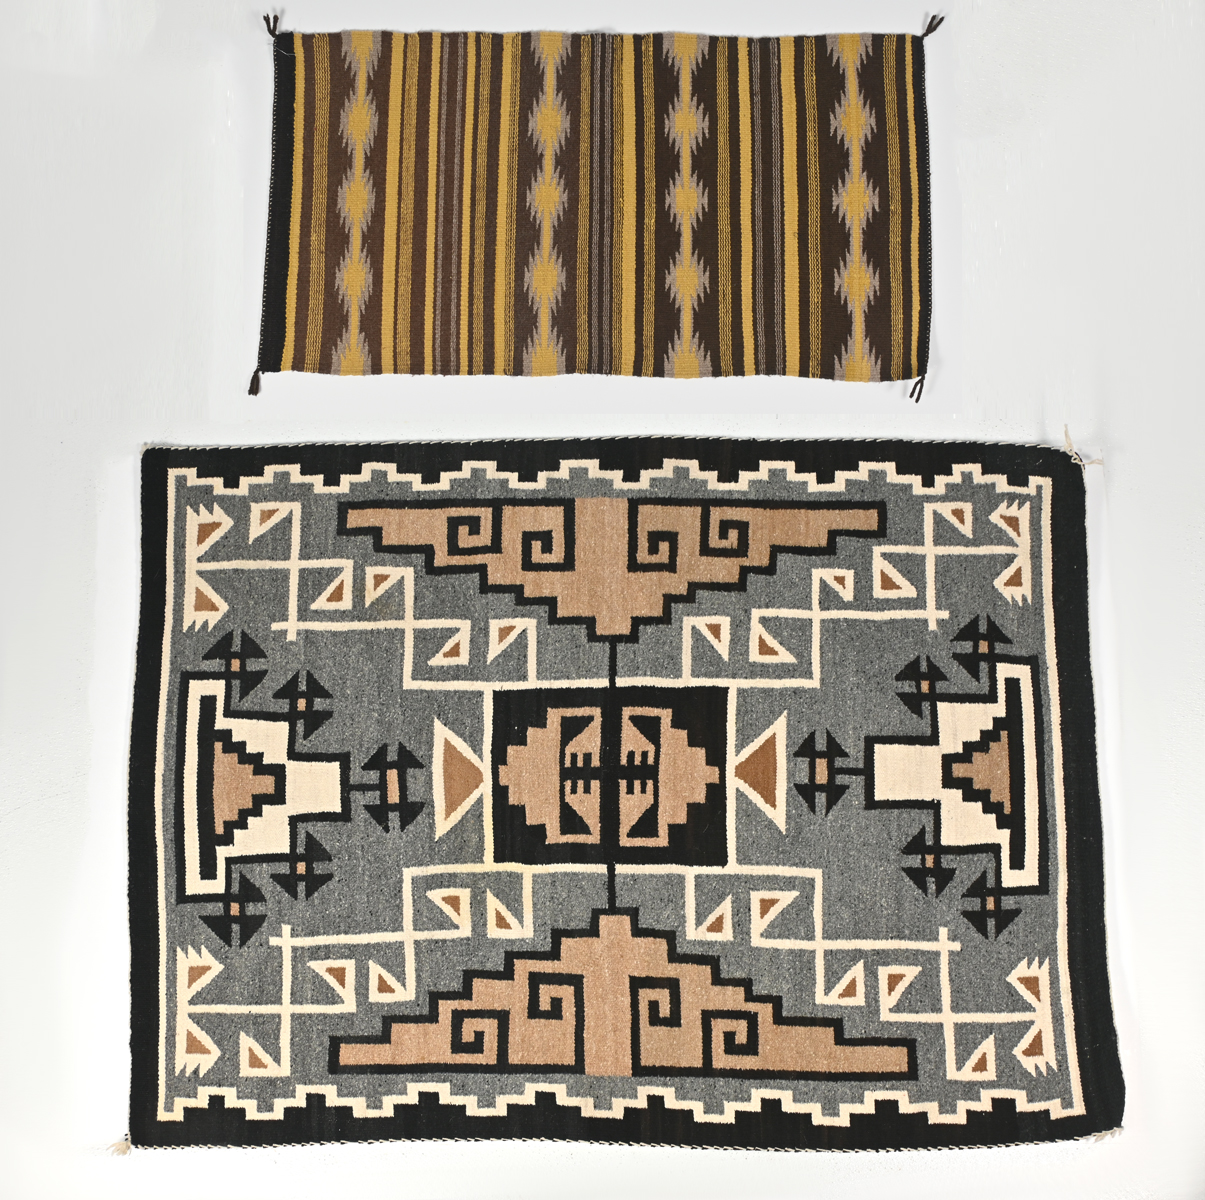 2 NAVAJO INDIAN RUGS: Two woven